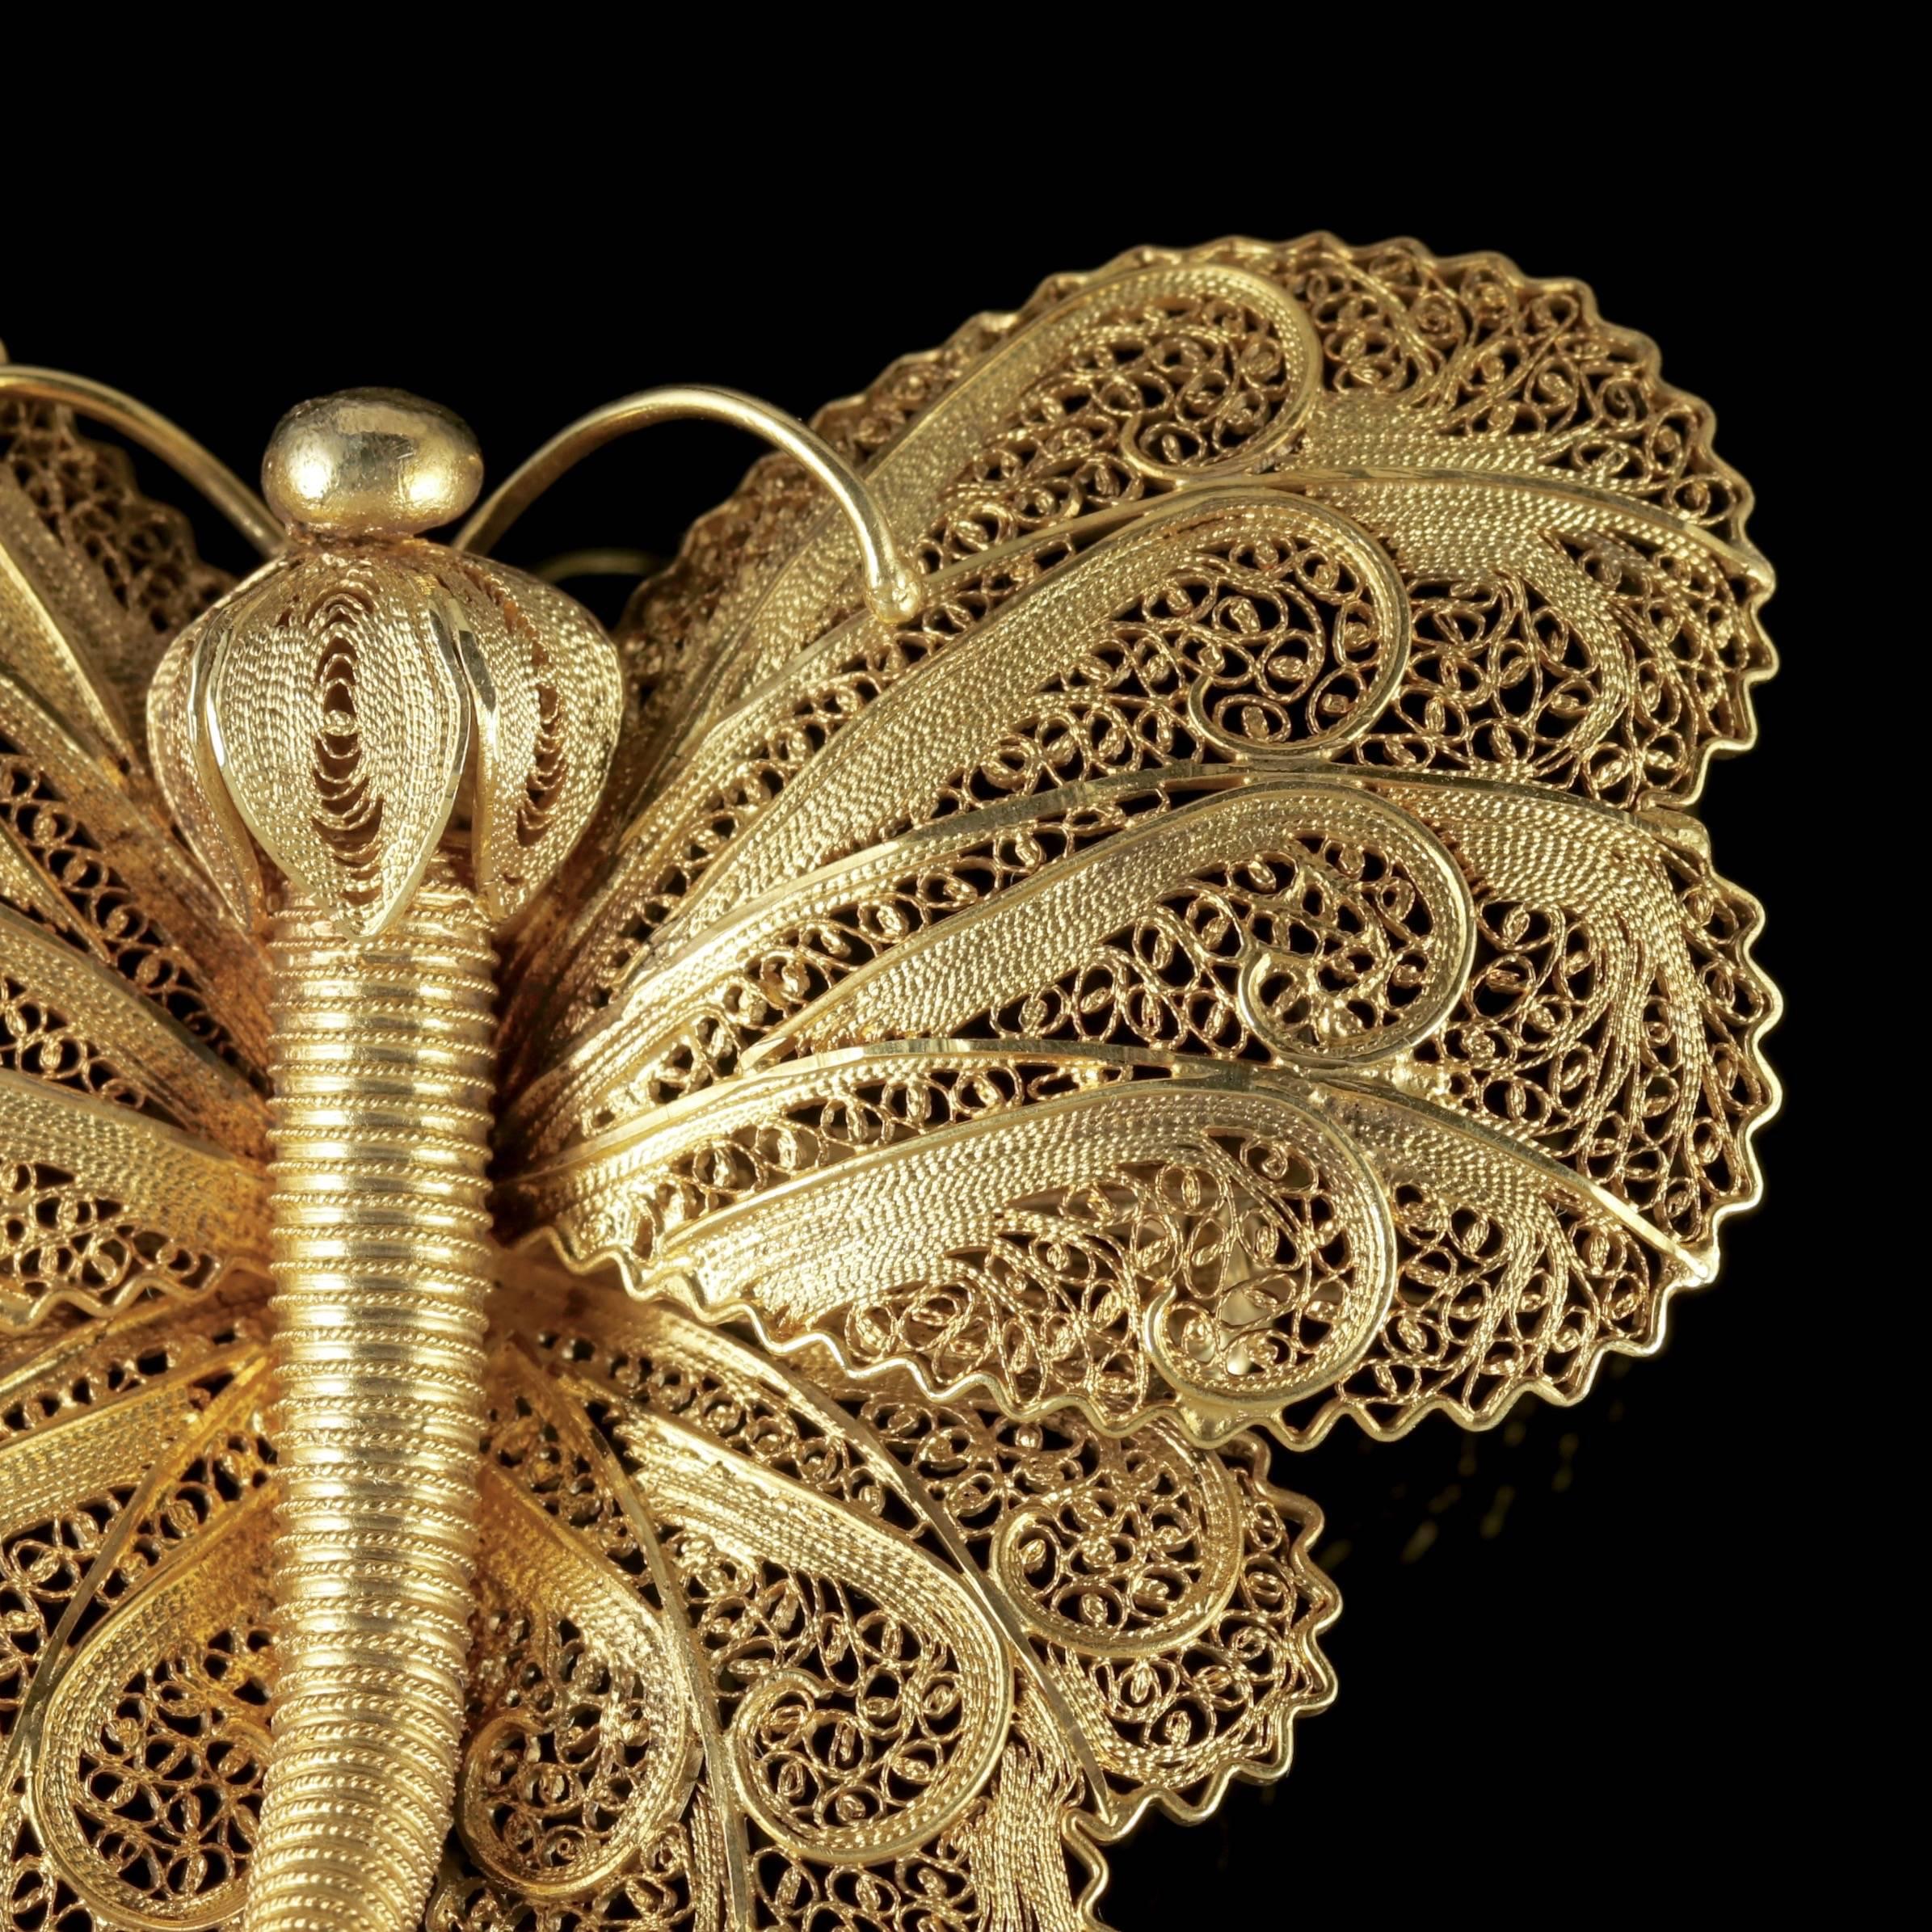 This stunning antique Victorian large golden butterfly brooch is Circa 1900. 

The fabulous abstract butterfly displays beautiful, detailed workmanship with decorative wings and head that almost look like golden flower petals.

The body and tail are